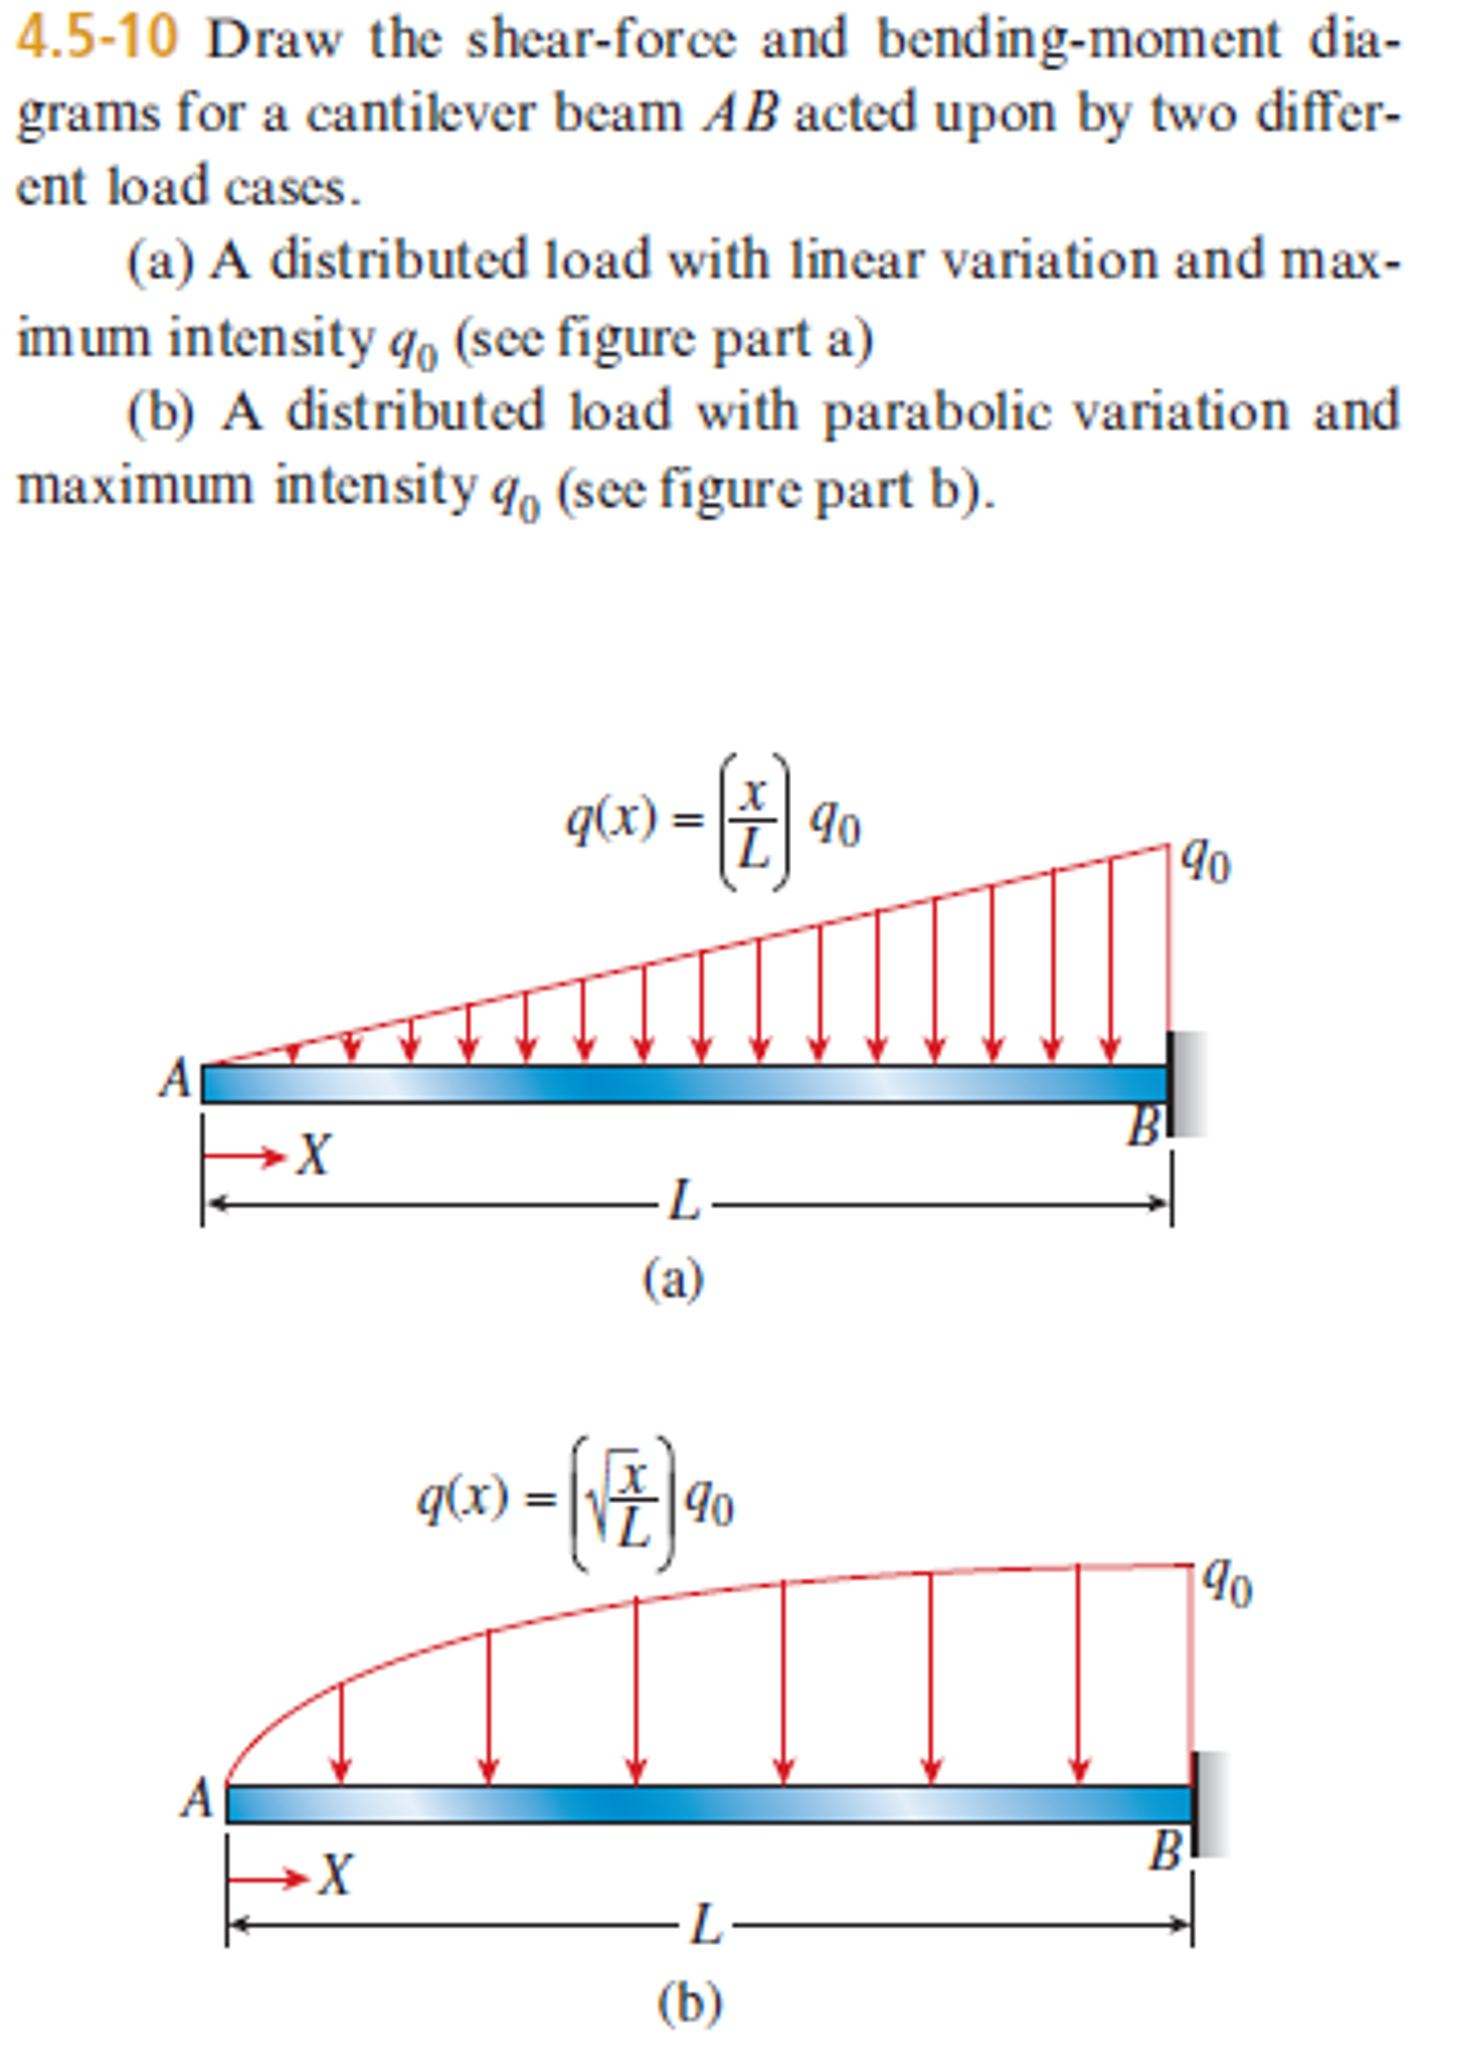 [DIAGRAM] Shear Force Bending Moment Diagram Cantilever Beam With And ...